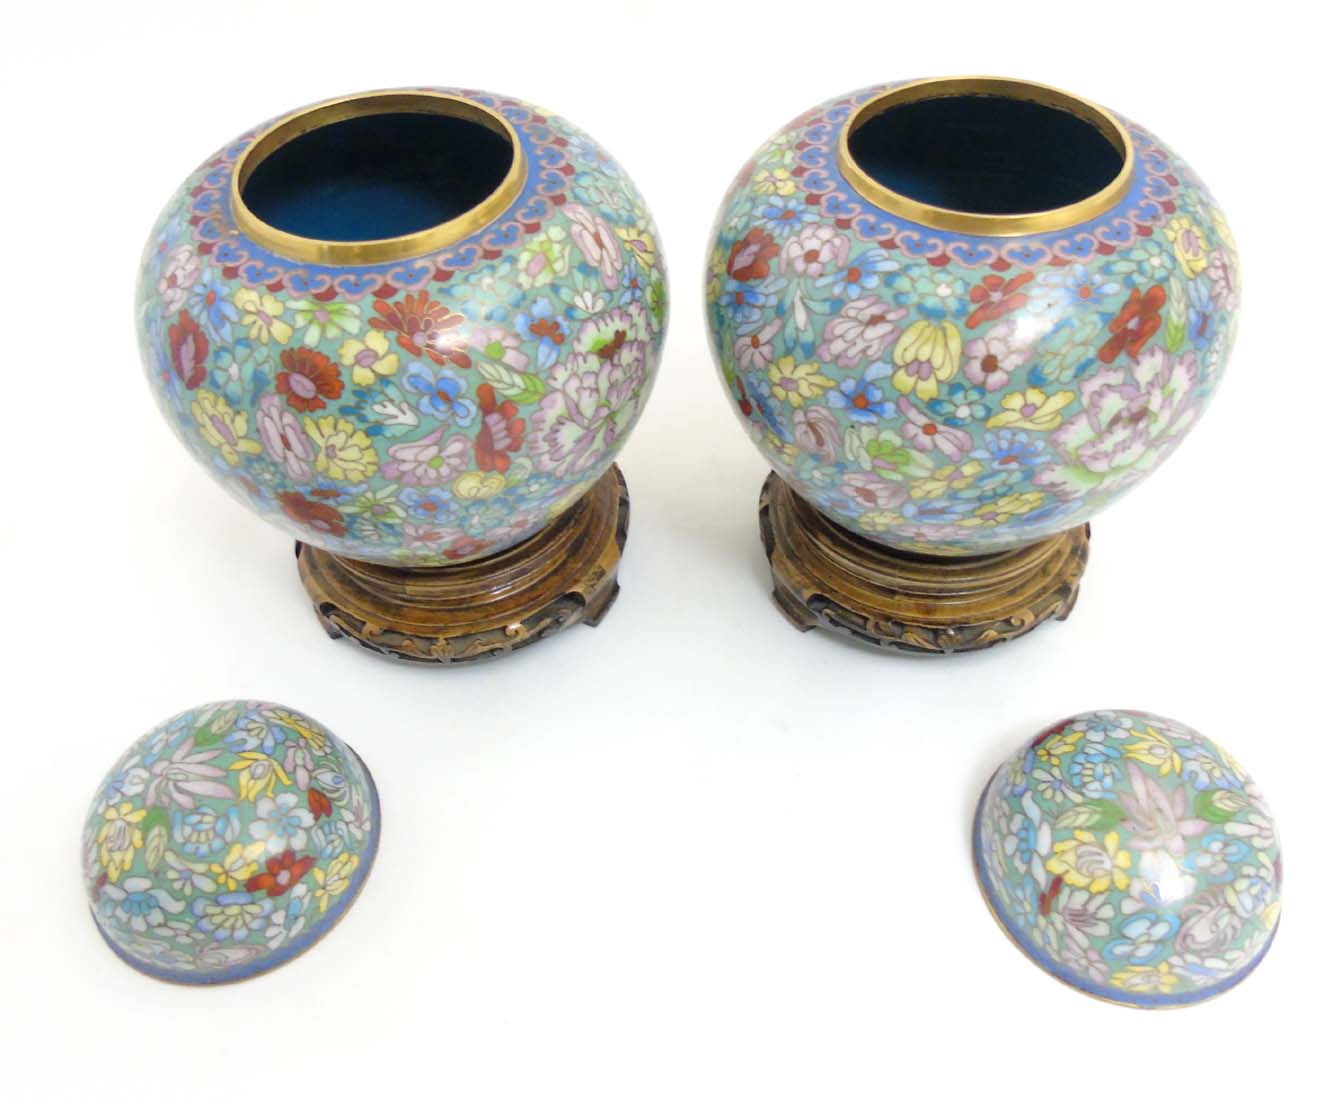 A pair of cloisonne gilt brass Ginger jars on stands with floral decoration. - Image 4 of 9